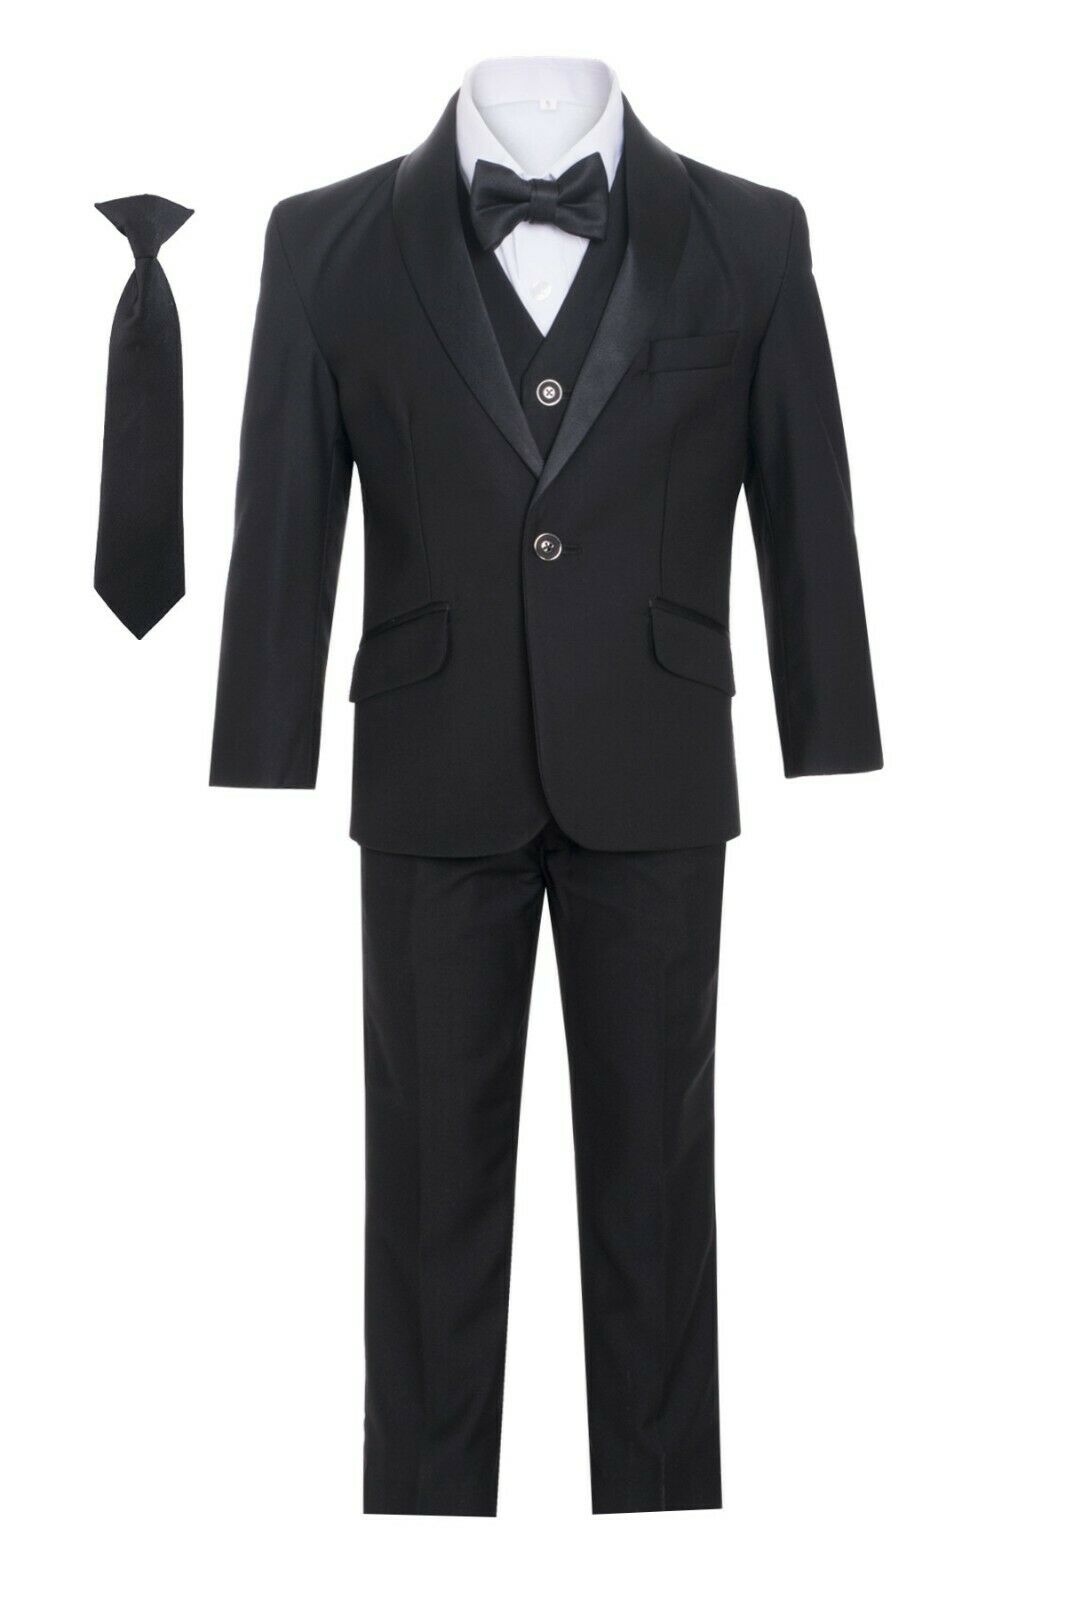 A boy's charm is accentuated in the sophisticated silhouette of a black shawl tuxedo suit.